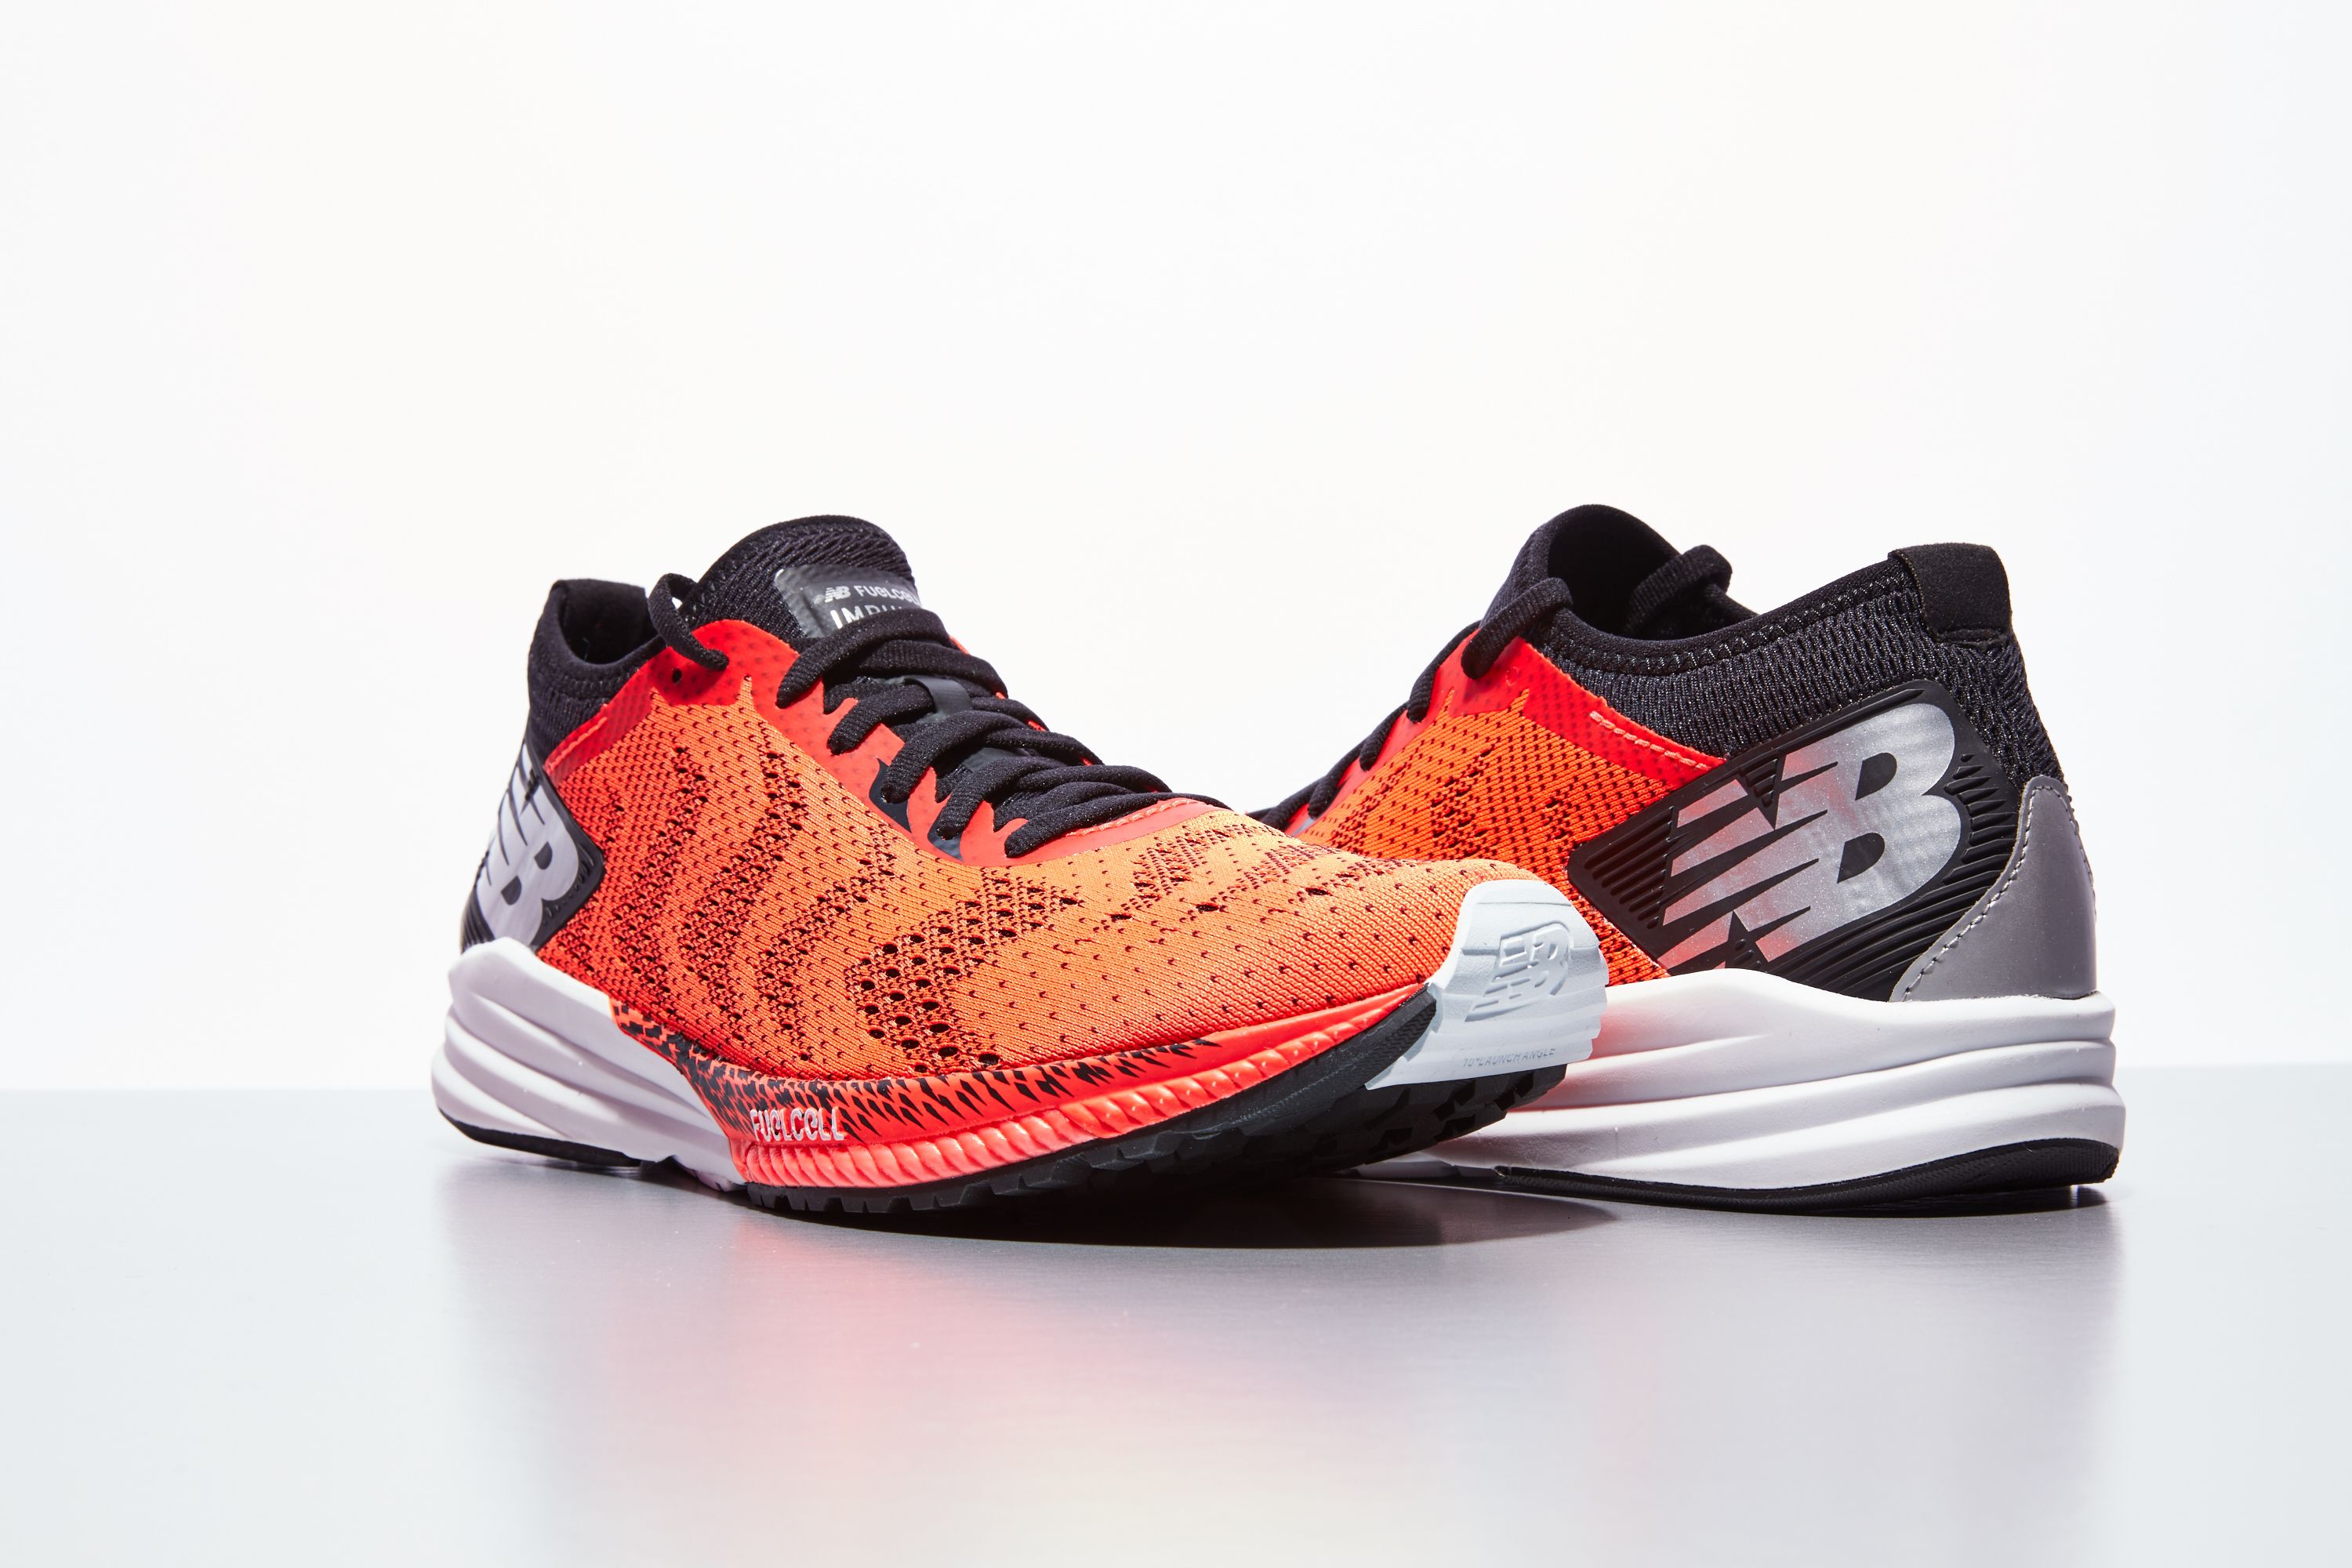 He may be flashy, but boy does he back it up. New Balance's NEW FuelCe, New Balance Shoe